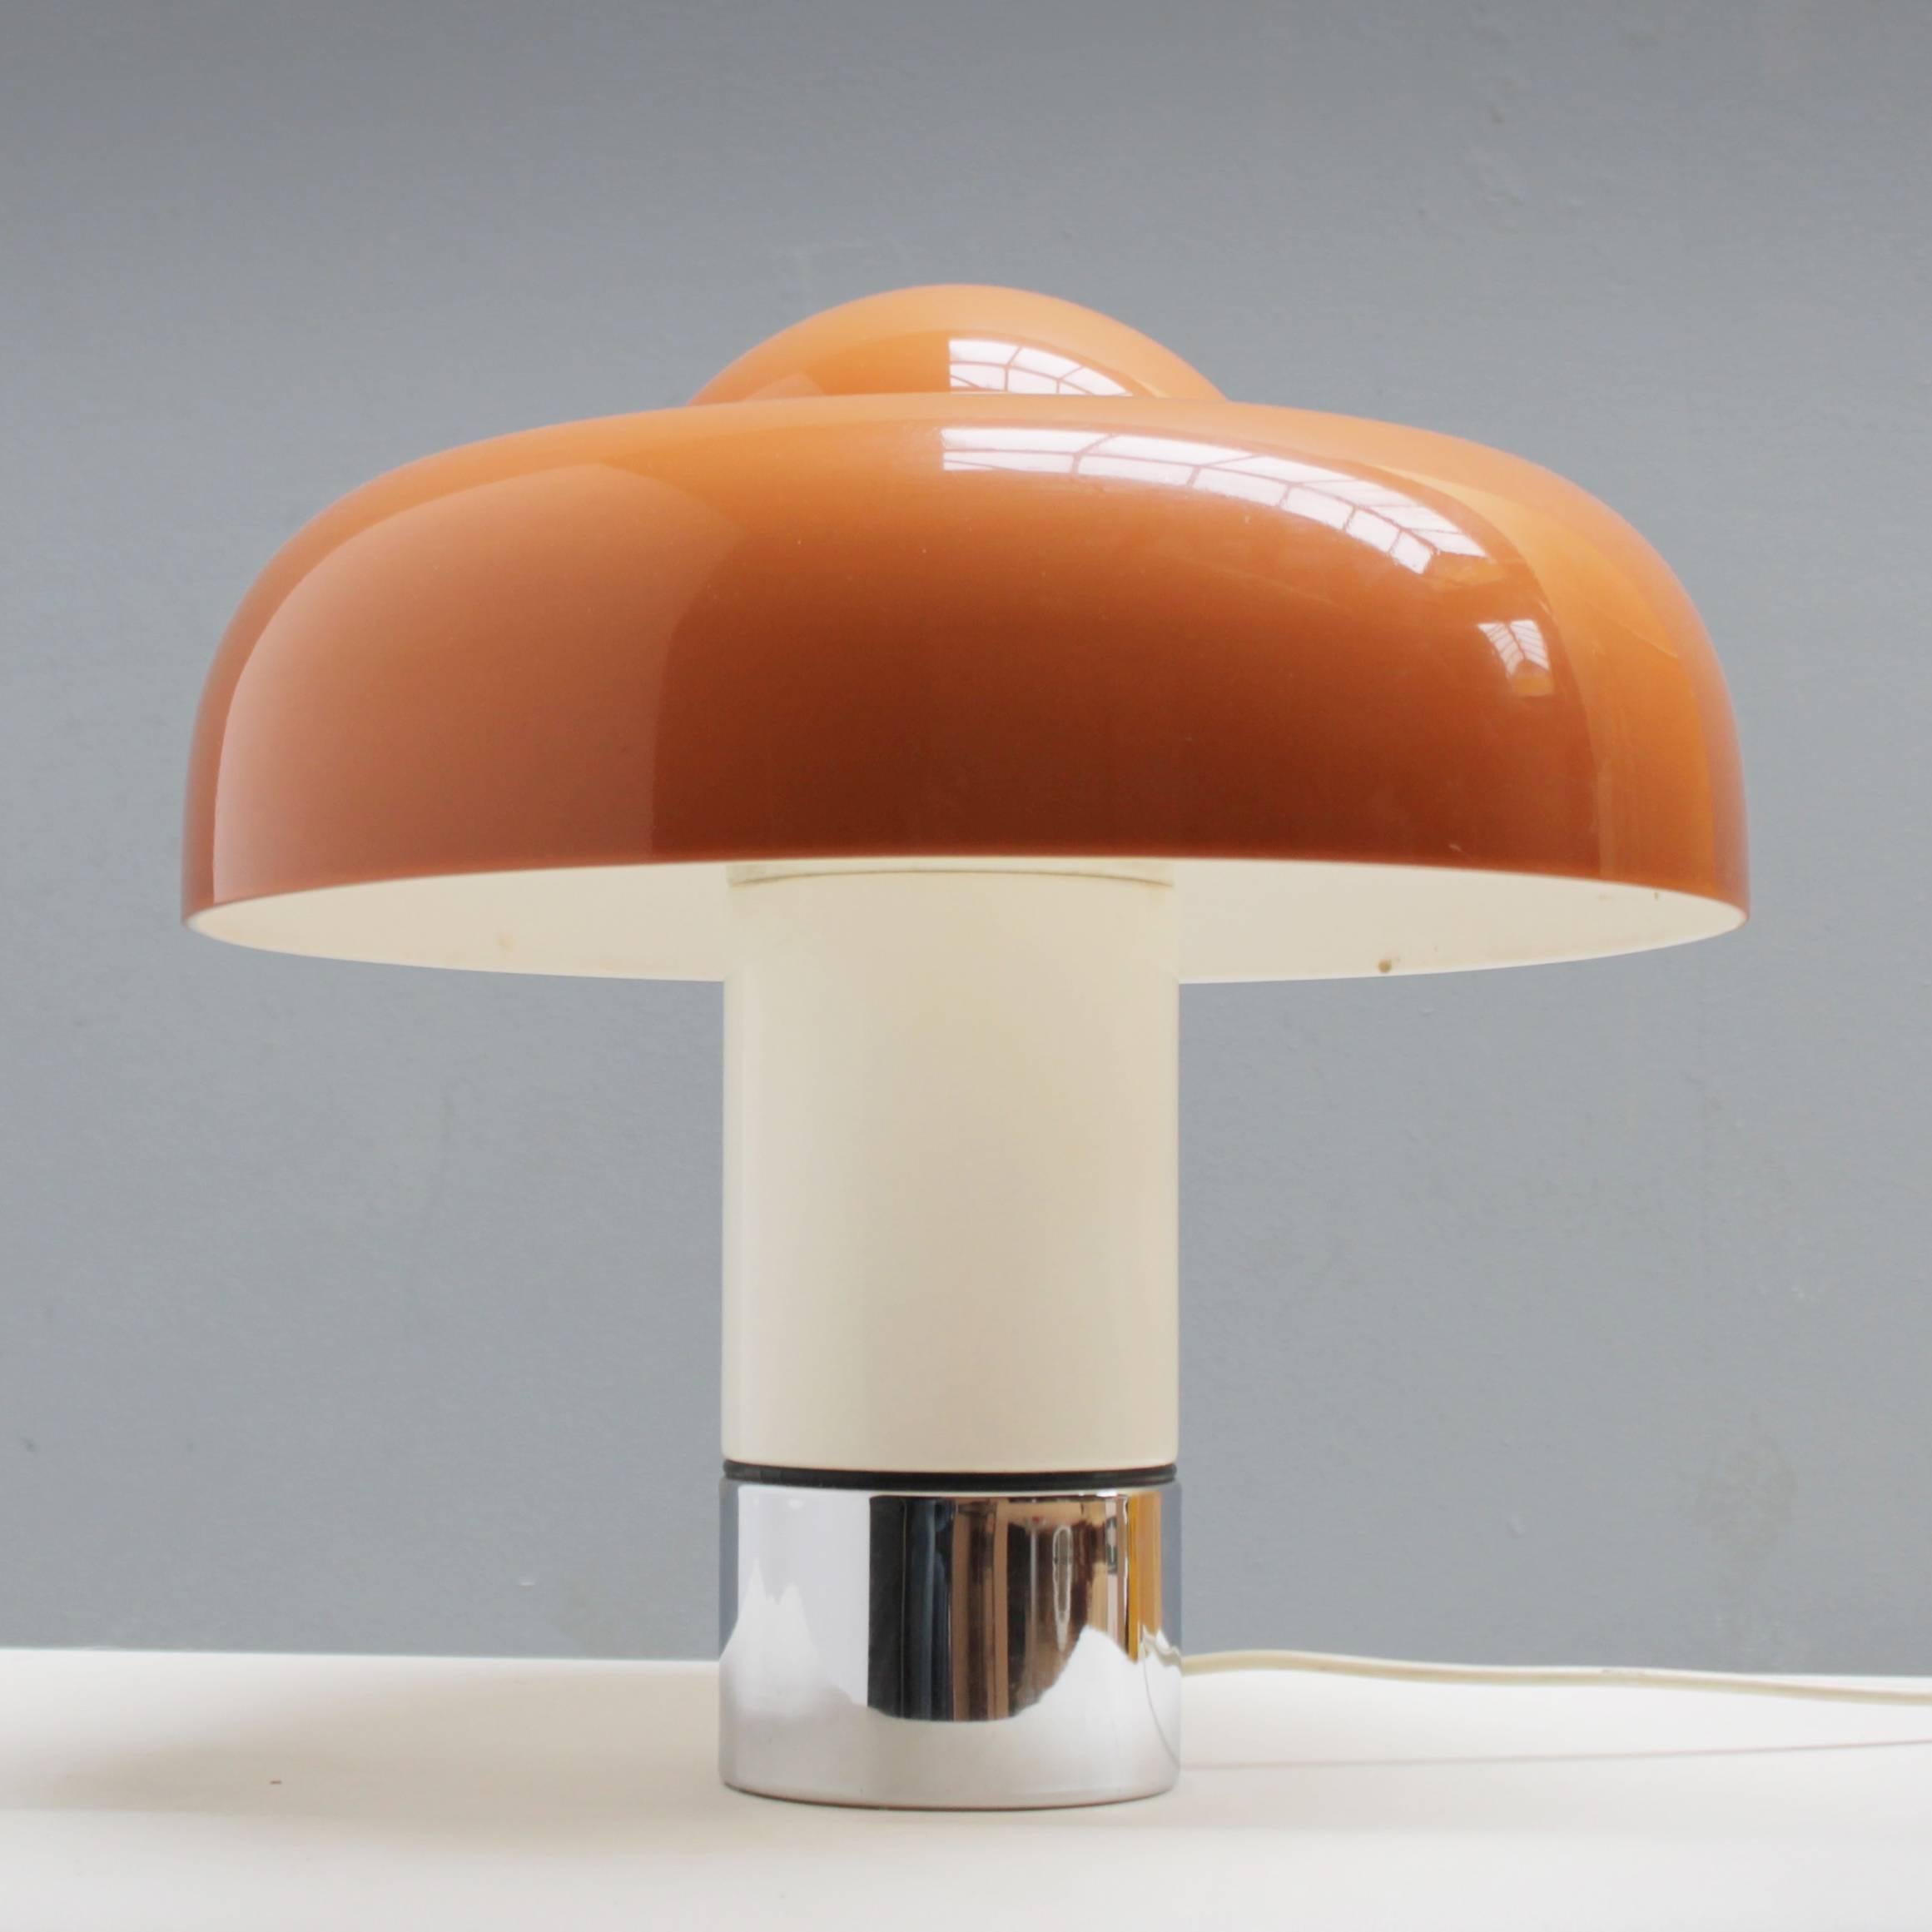 Brumbury table lamp designed by Luigi Massoni, manufactured in 1969 by Harvey Guzzini, Italy. Heavy foot of metal (white varnish and chrome-plated), the shade is made of brown opal acrylic. 
Measurements: Height: 18.1 in. (46 cm), diameter shade: